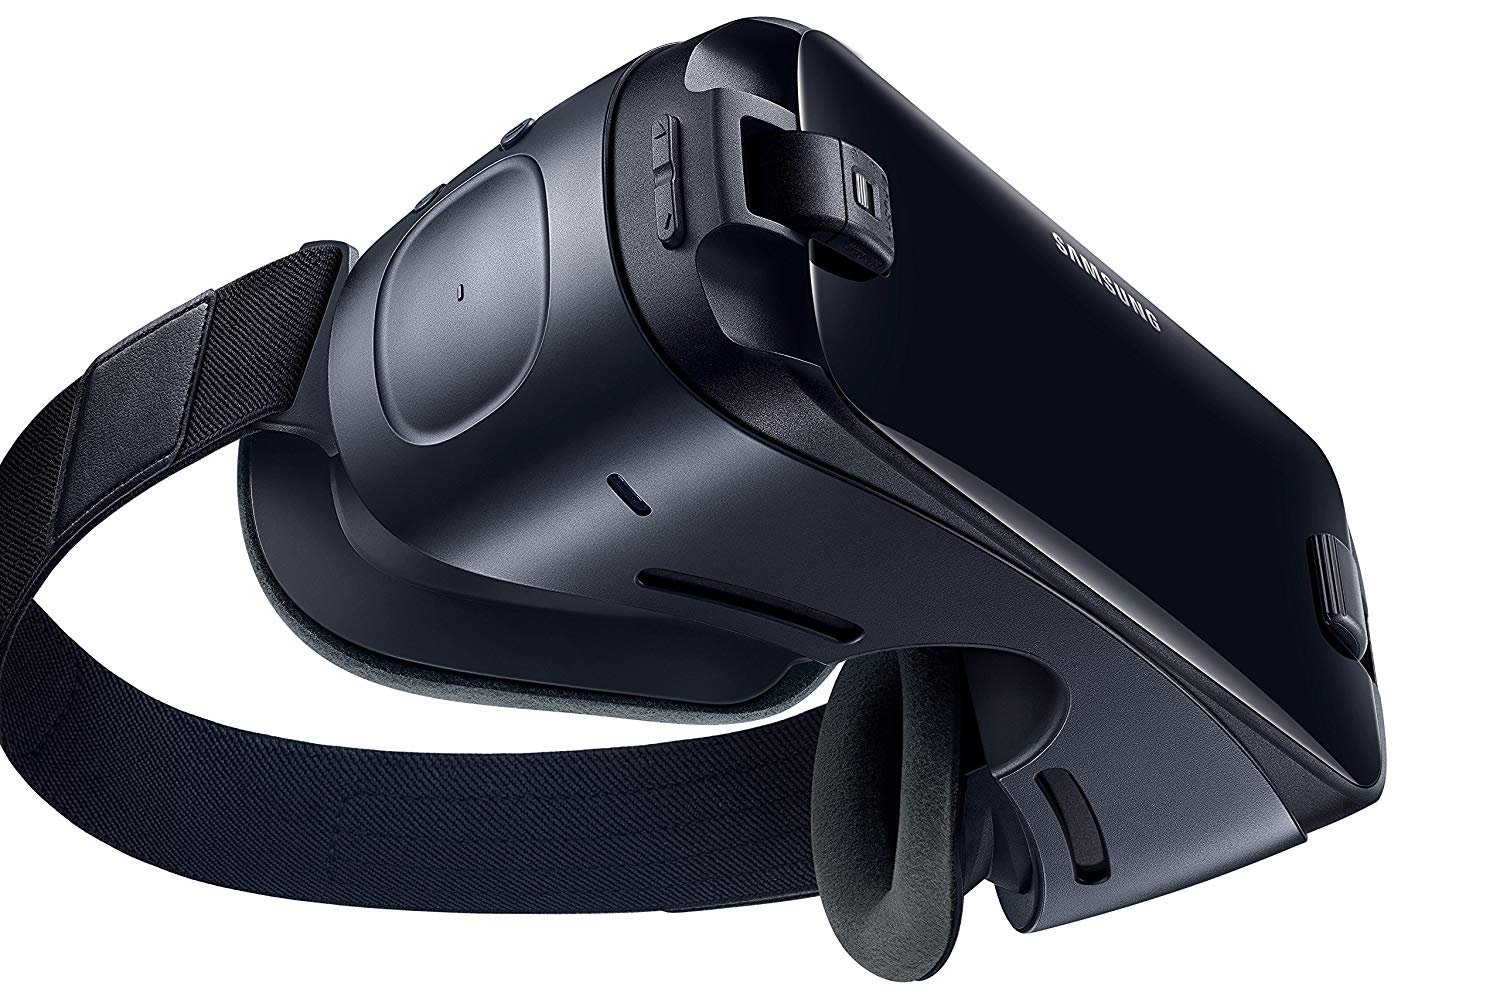 Samsung Gear Vr Virtual Reality Headset With Controller Black